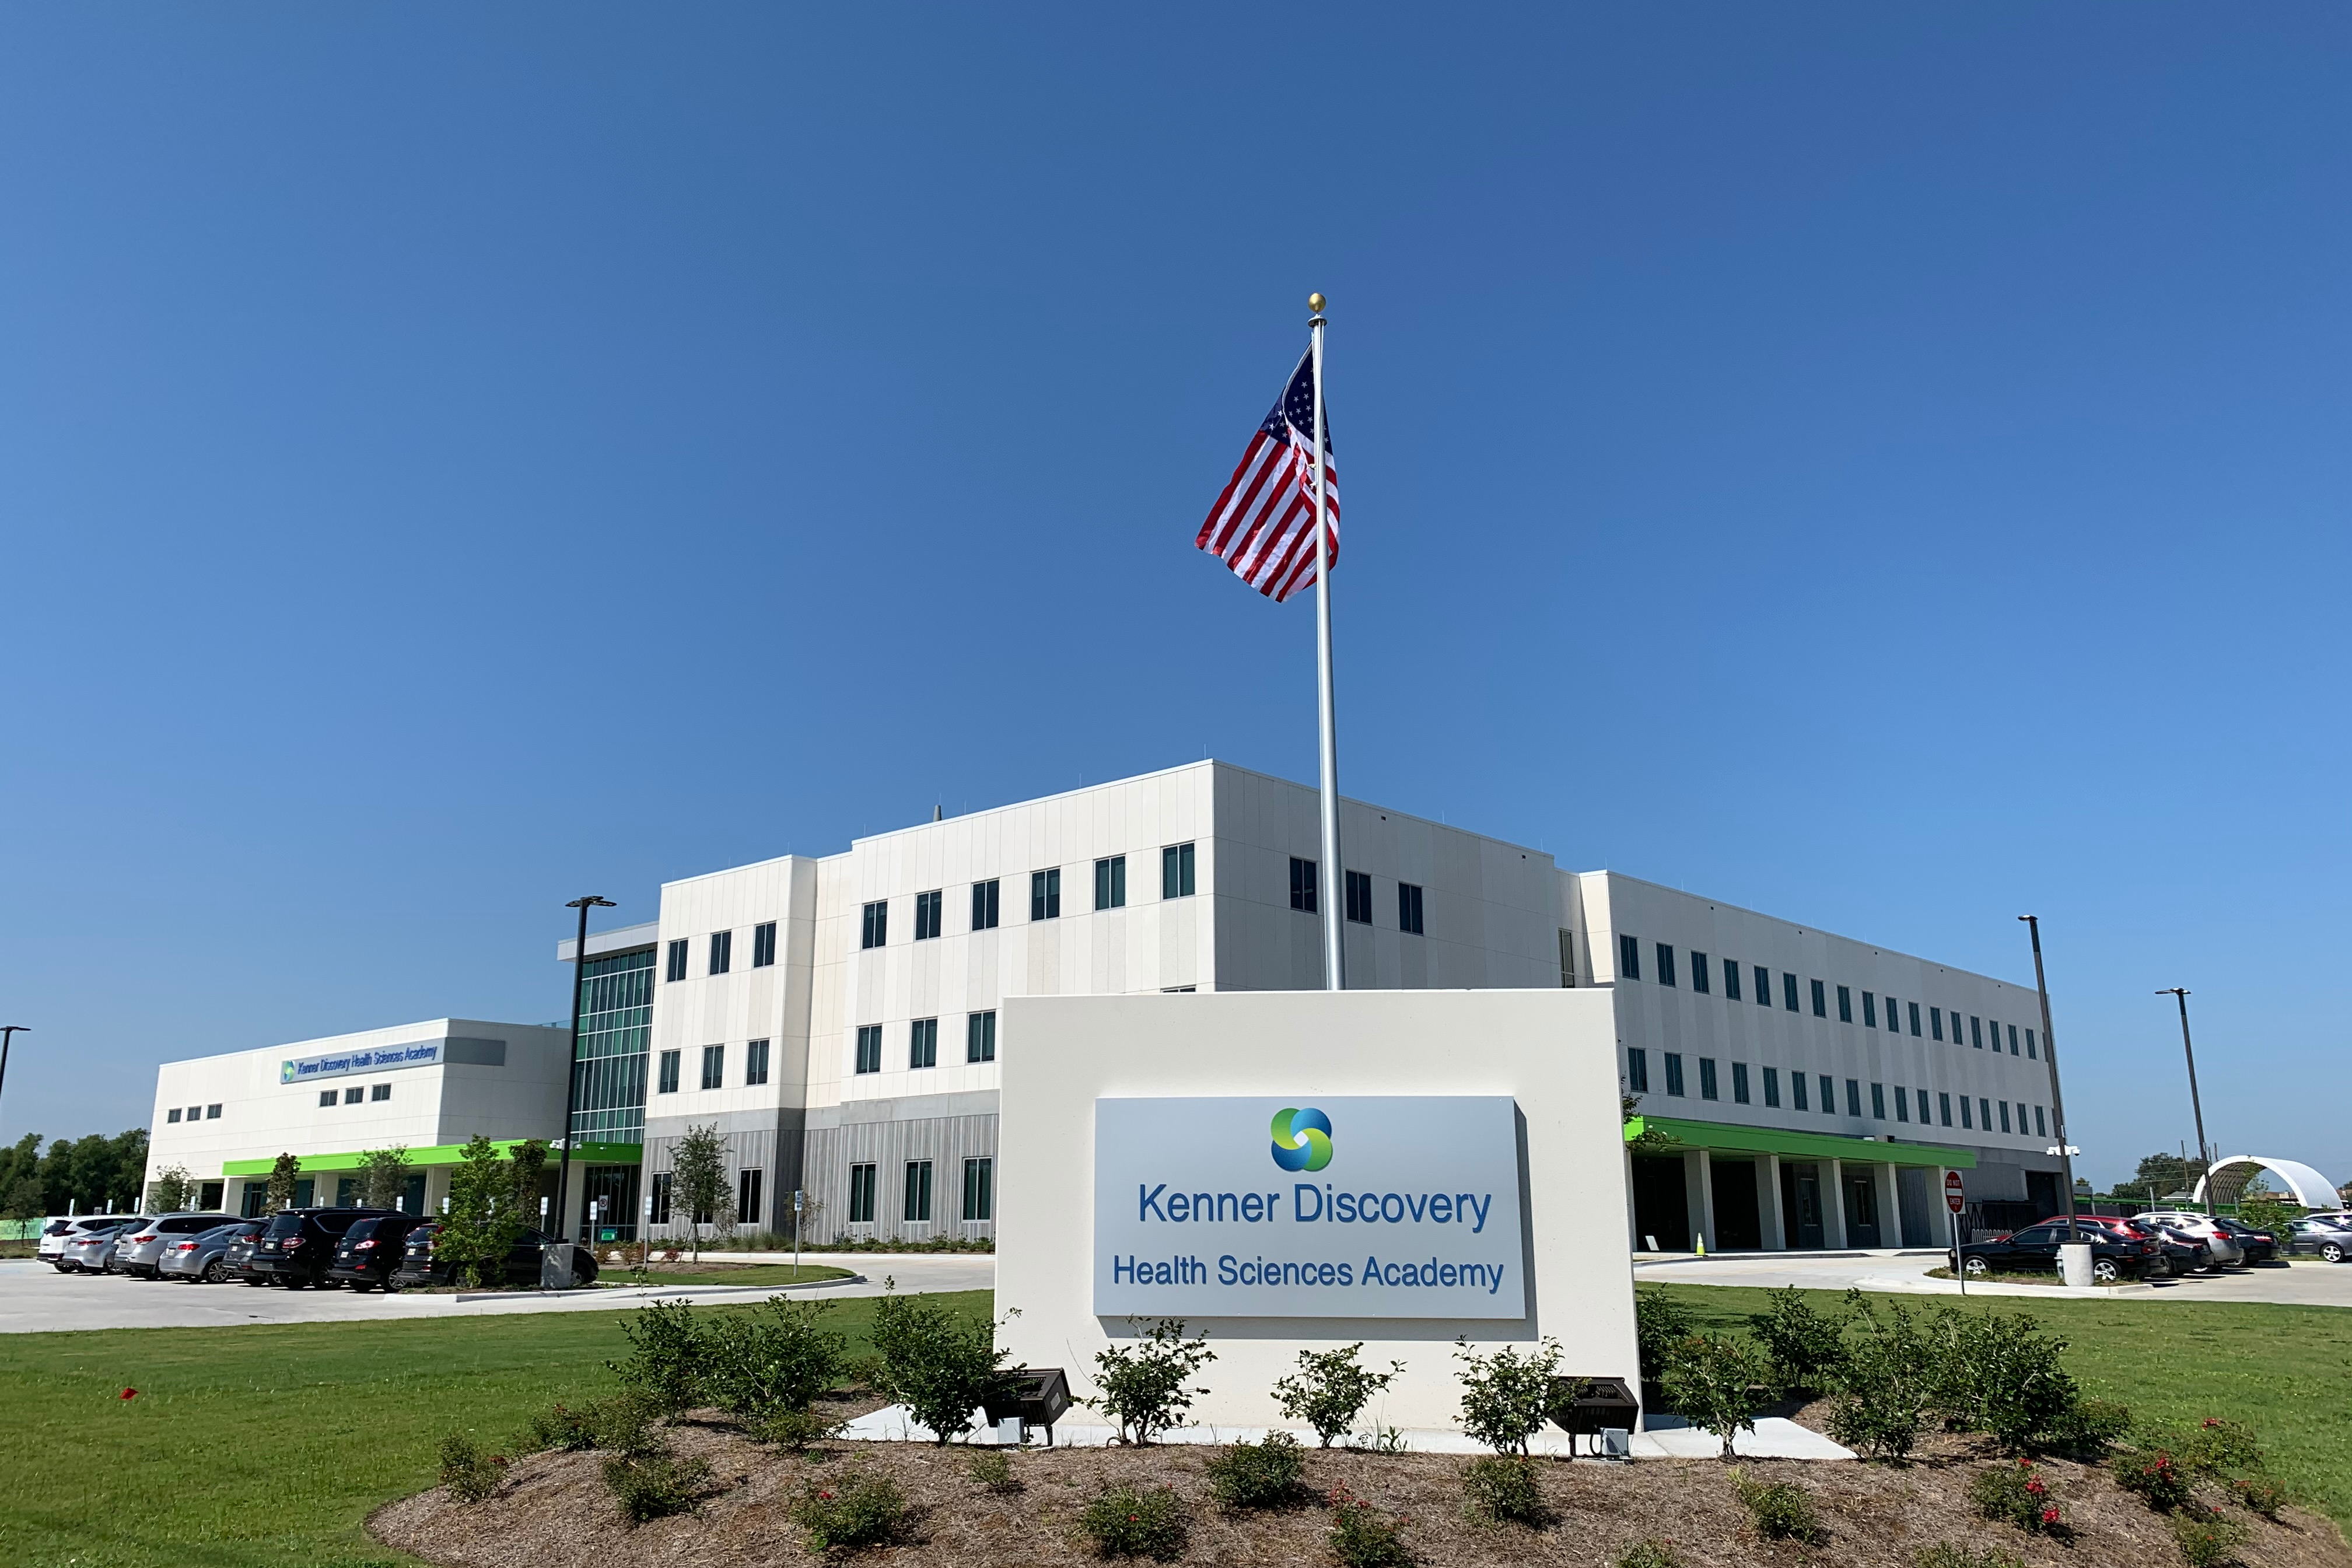 Kenner Discovery Health Sciences Academy building exterior